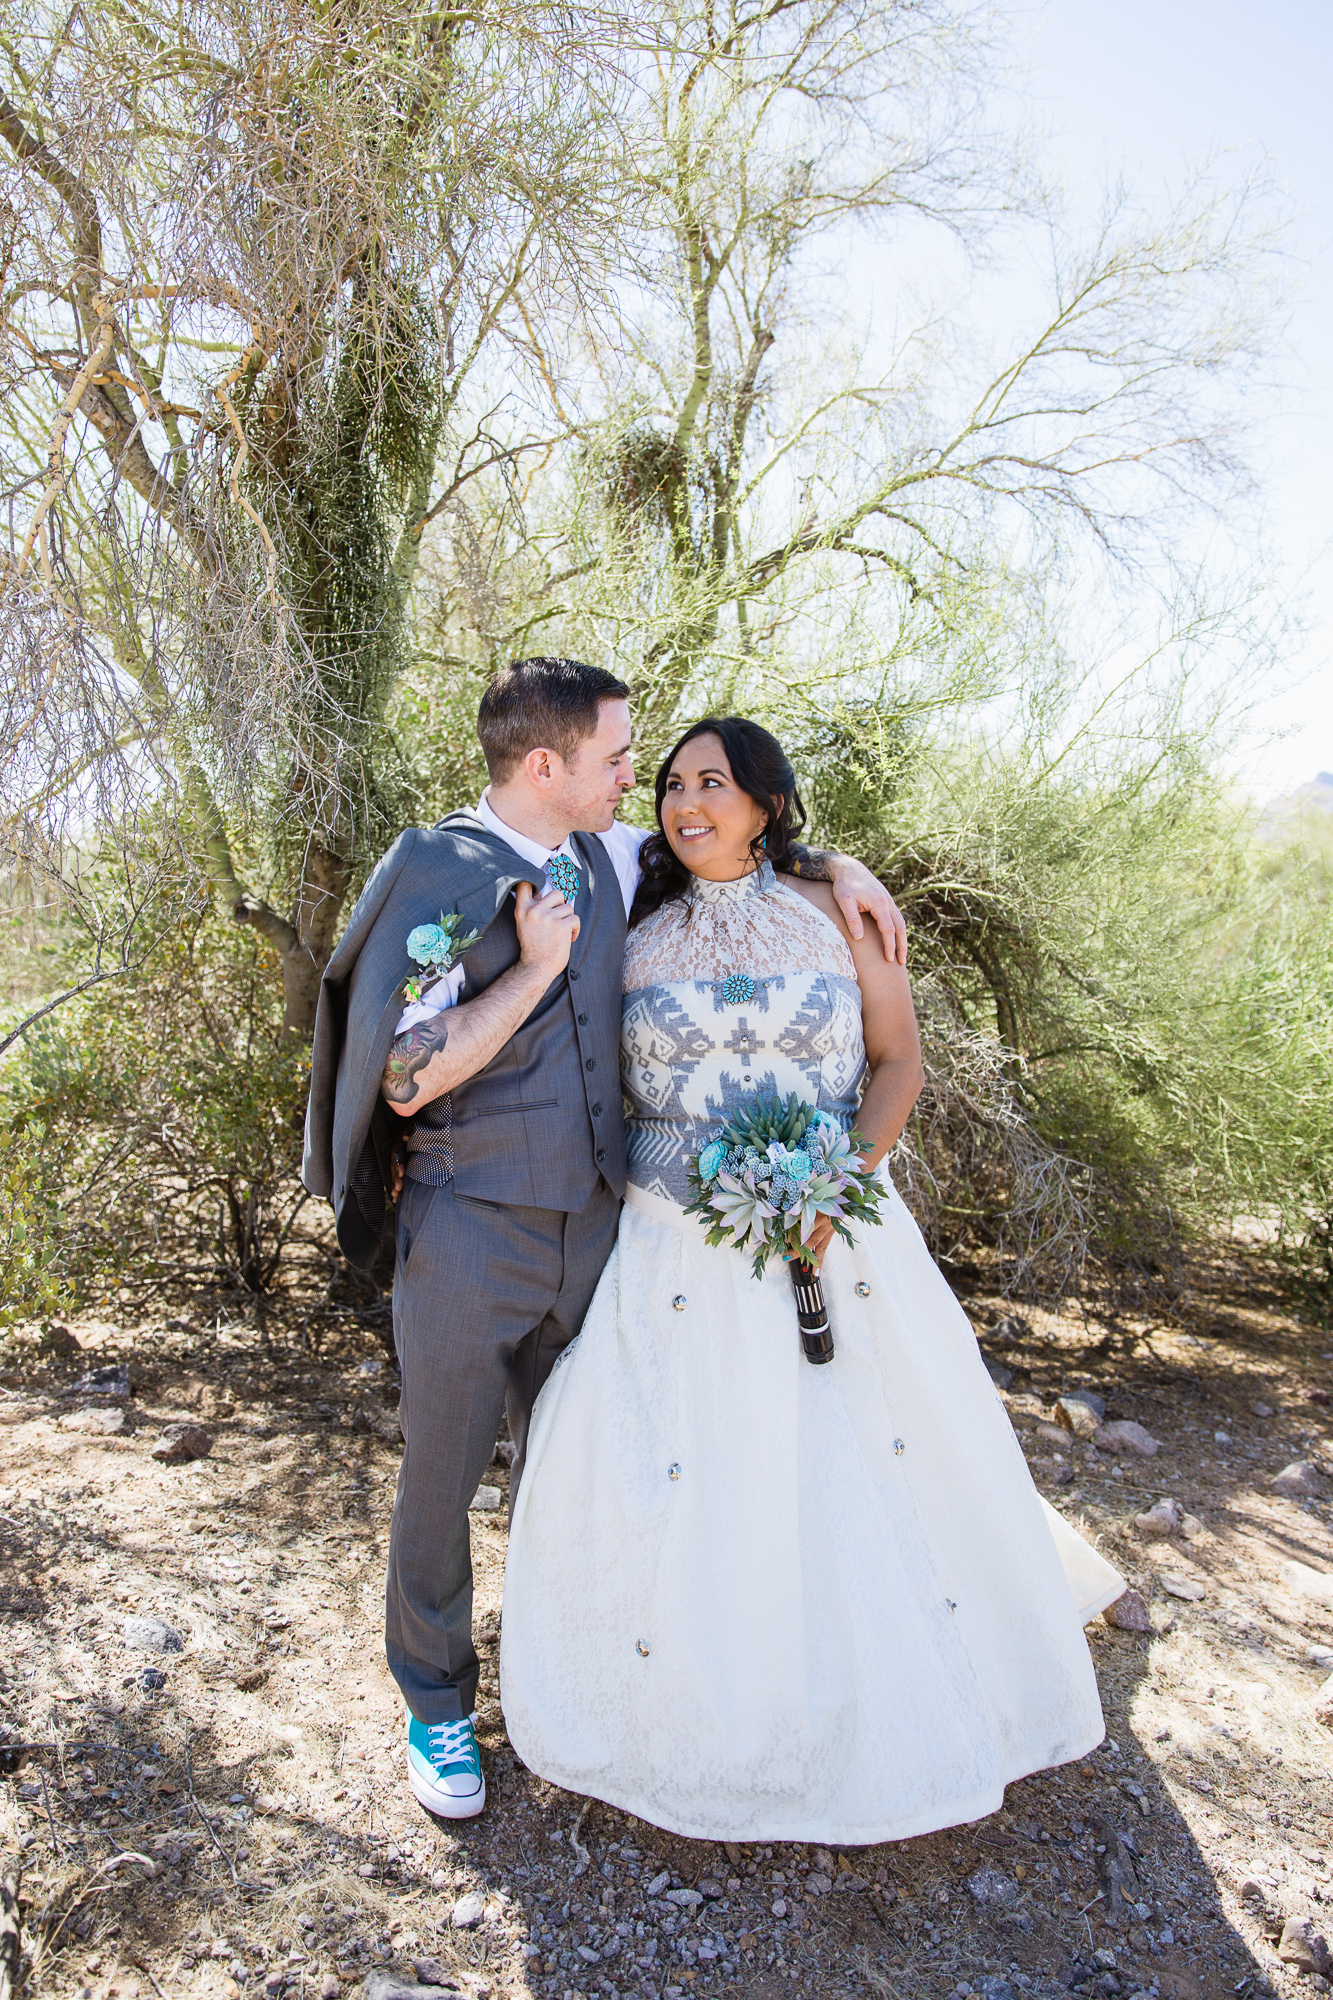 Tattooed and Irish groom and Navajo bride in a native inspired wedding dress at their Lost Dutchman State Park Turquoise Star Wars wedding by Phoenix wedding photographers PMA Photography.